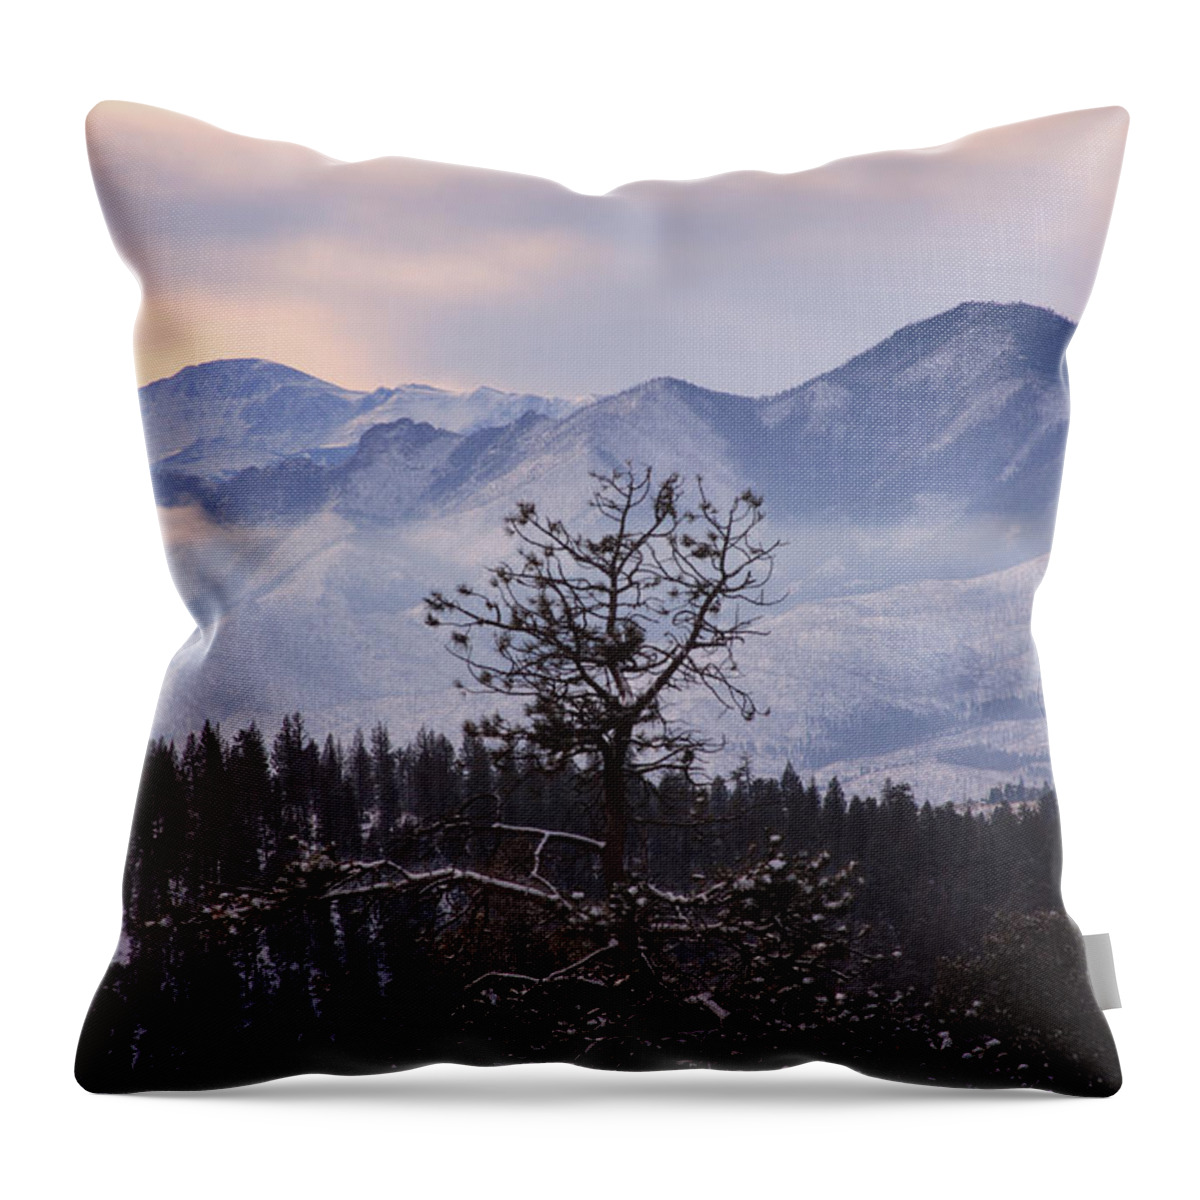 Landscape Throw Pillow featuring the photograph Morning Mountain Range by Brian Gustafson